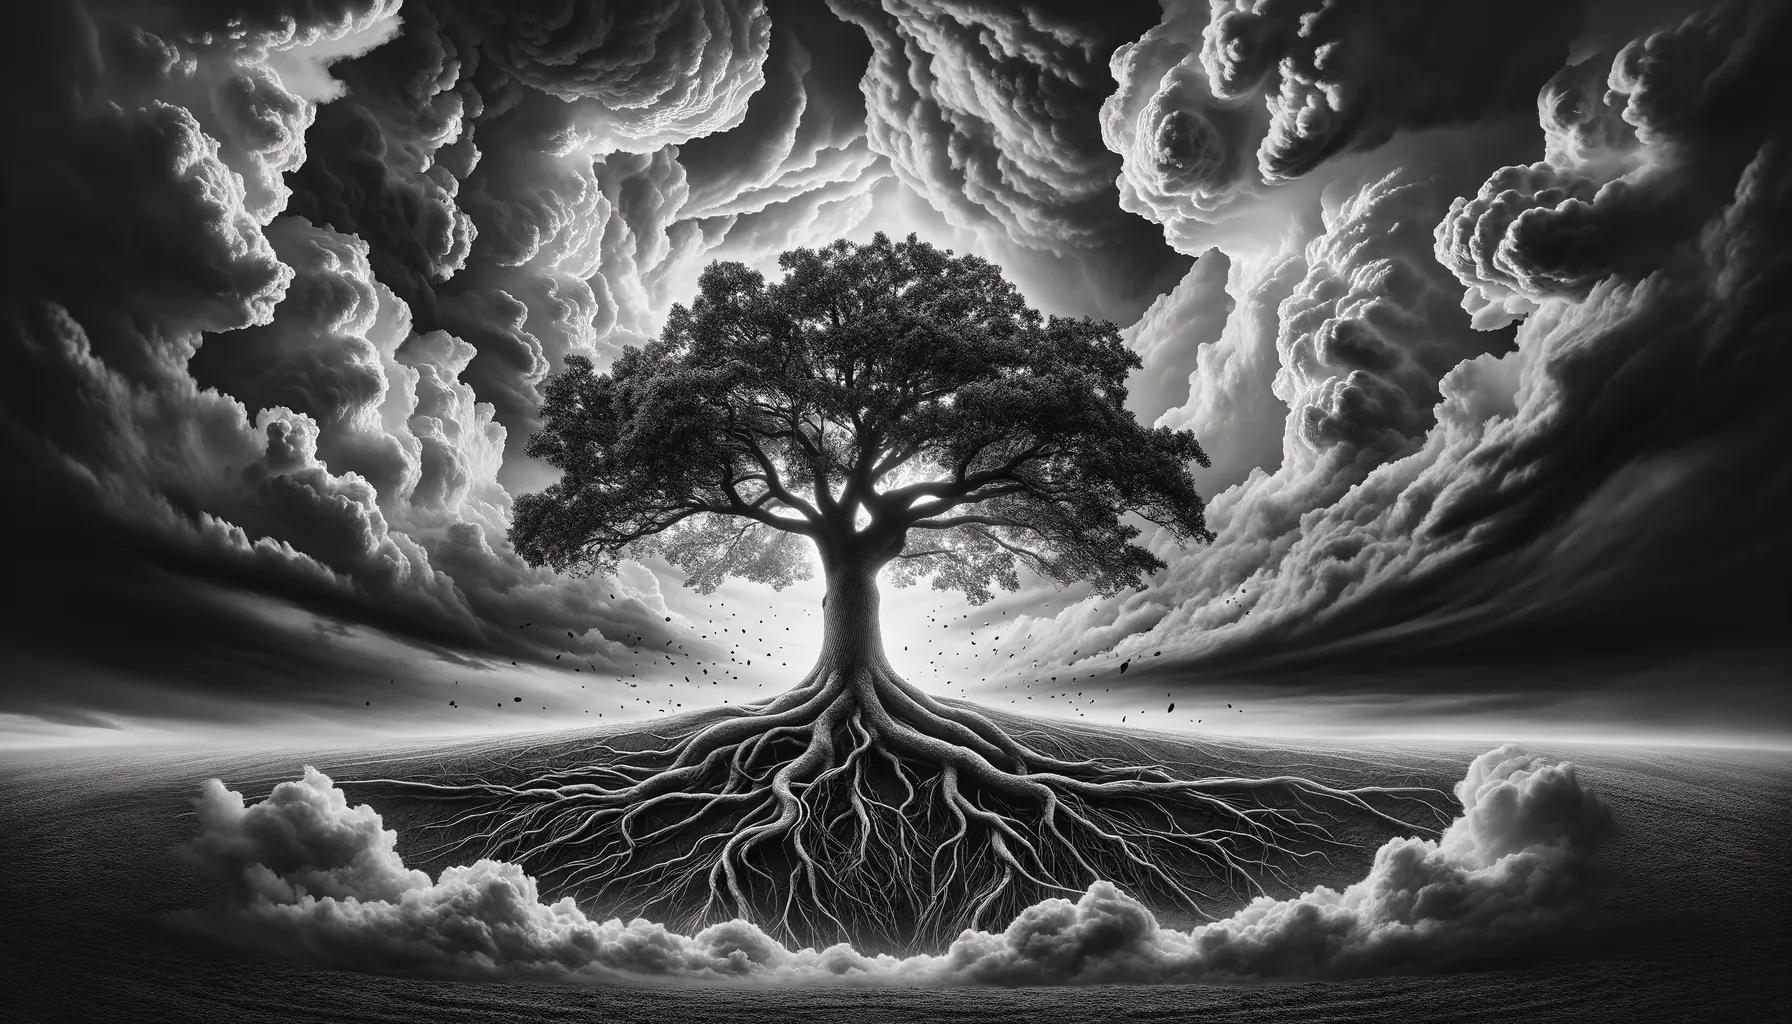 In the relentless storm of judgment, like the steadfast oak, our resilience roots us deeply, allowing love to stand tall and unwavering. This image is a tribute to the enduring power of age-gap connections, undiminished by the winds of criticism.